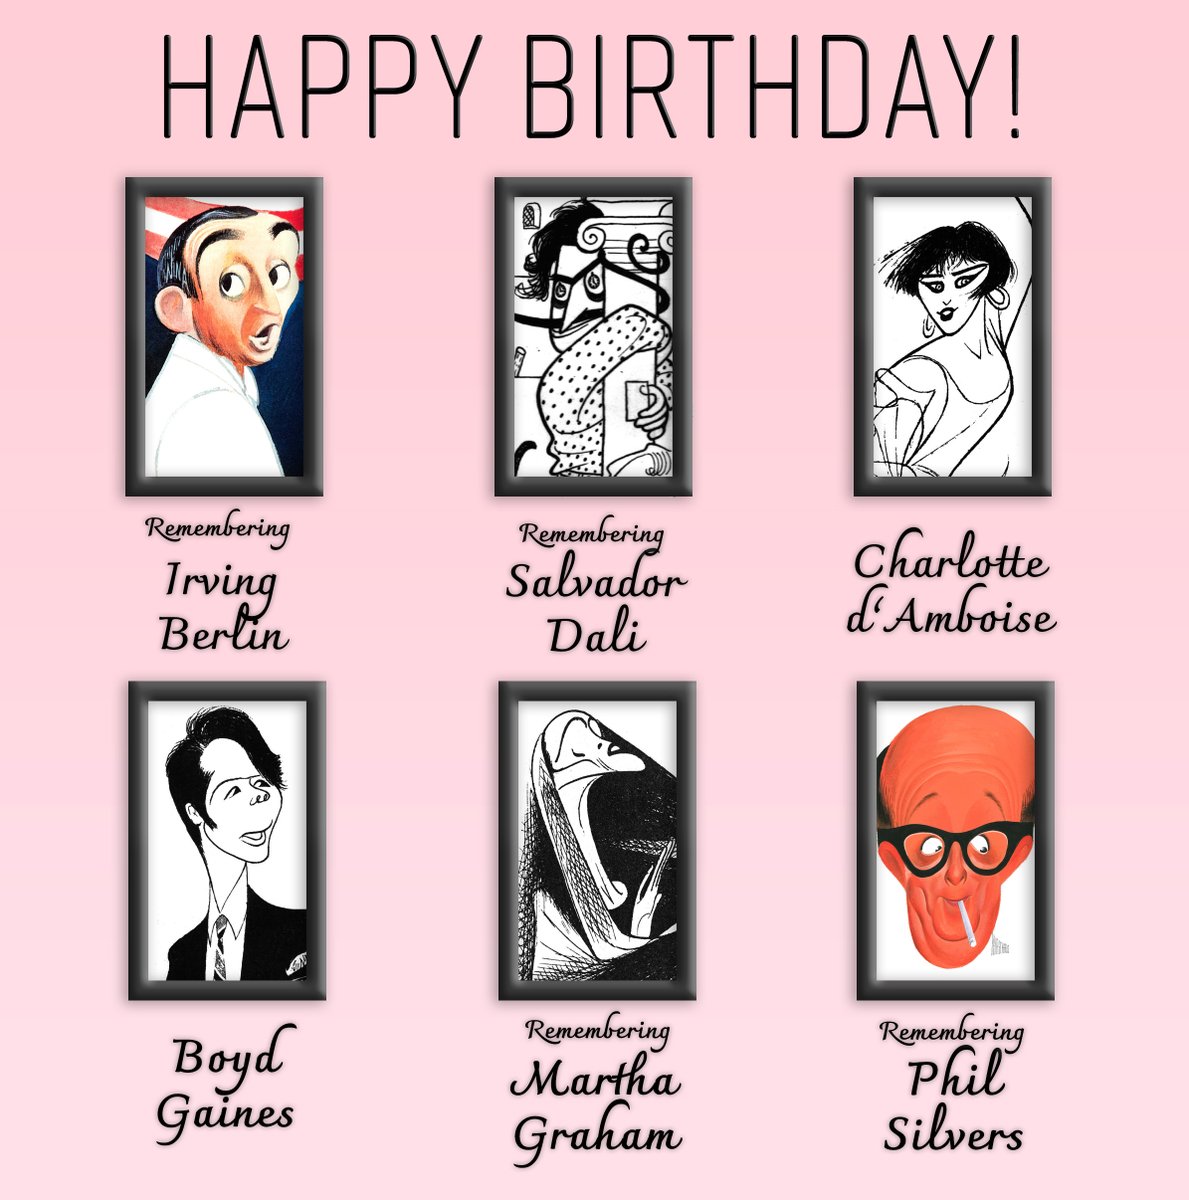 Today in Hirschfeld Birthdays: Irving Berlin, Salvador Dali, Charlotte d'Amboise, Boyd Gaines, Martha Graham, and Phil Silvers! View full works at alhirschfeldfoundation.org #Hirschfeld #Art #Drawings #Birthdays #IrvingBerling #PhilSilvers #MarthaGraham #Film #TV #Theater